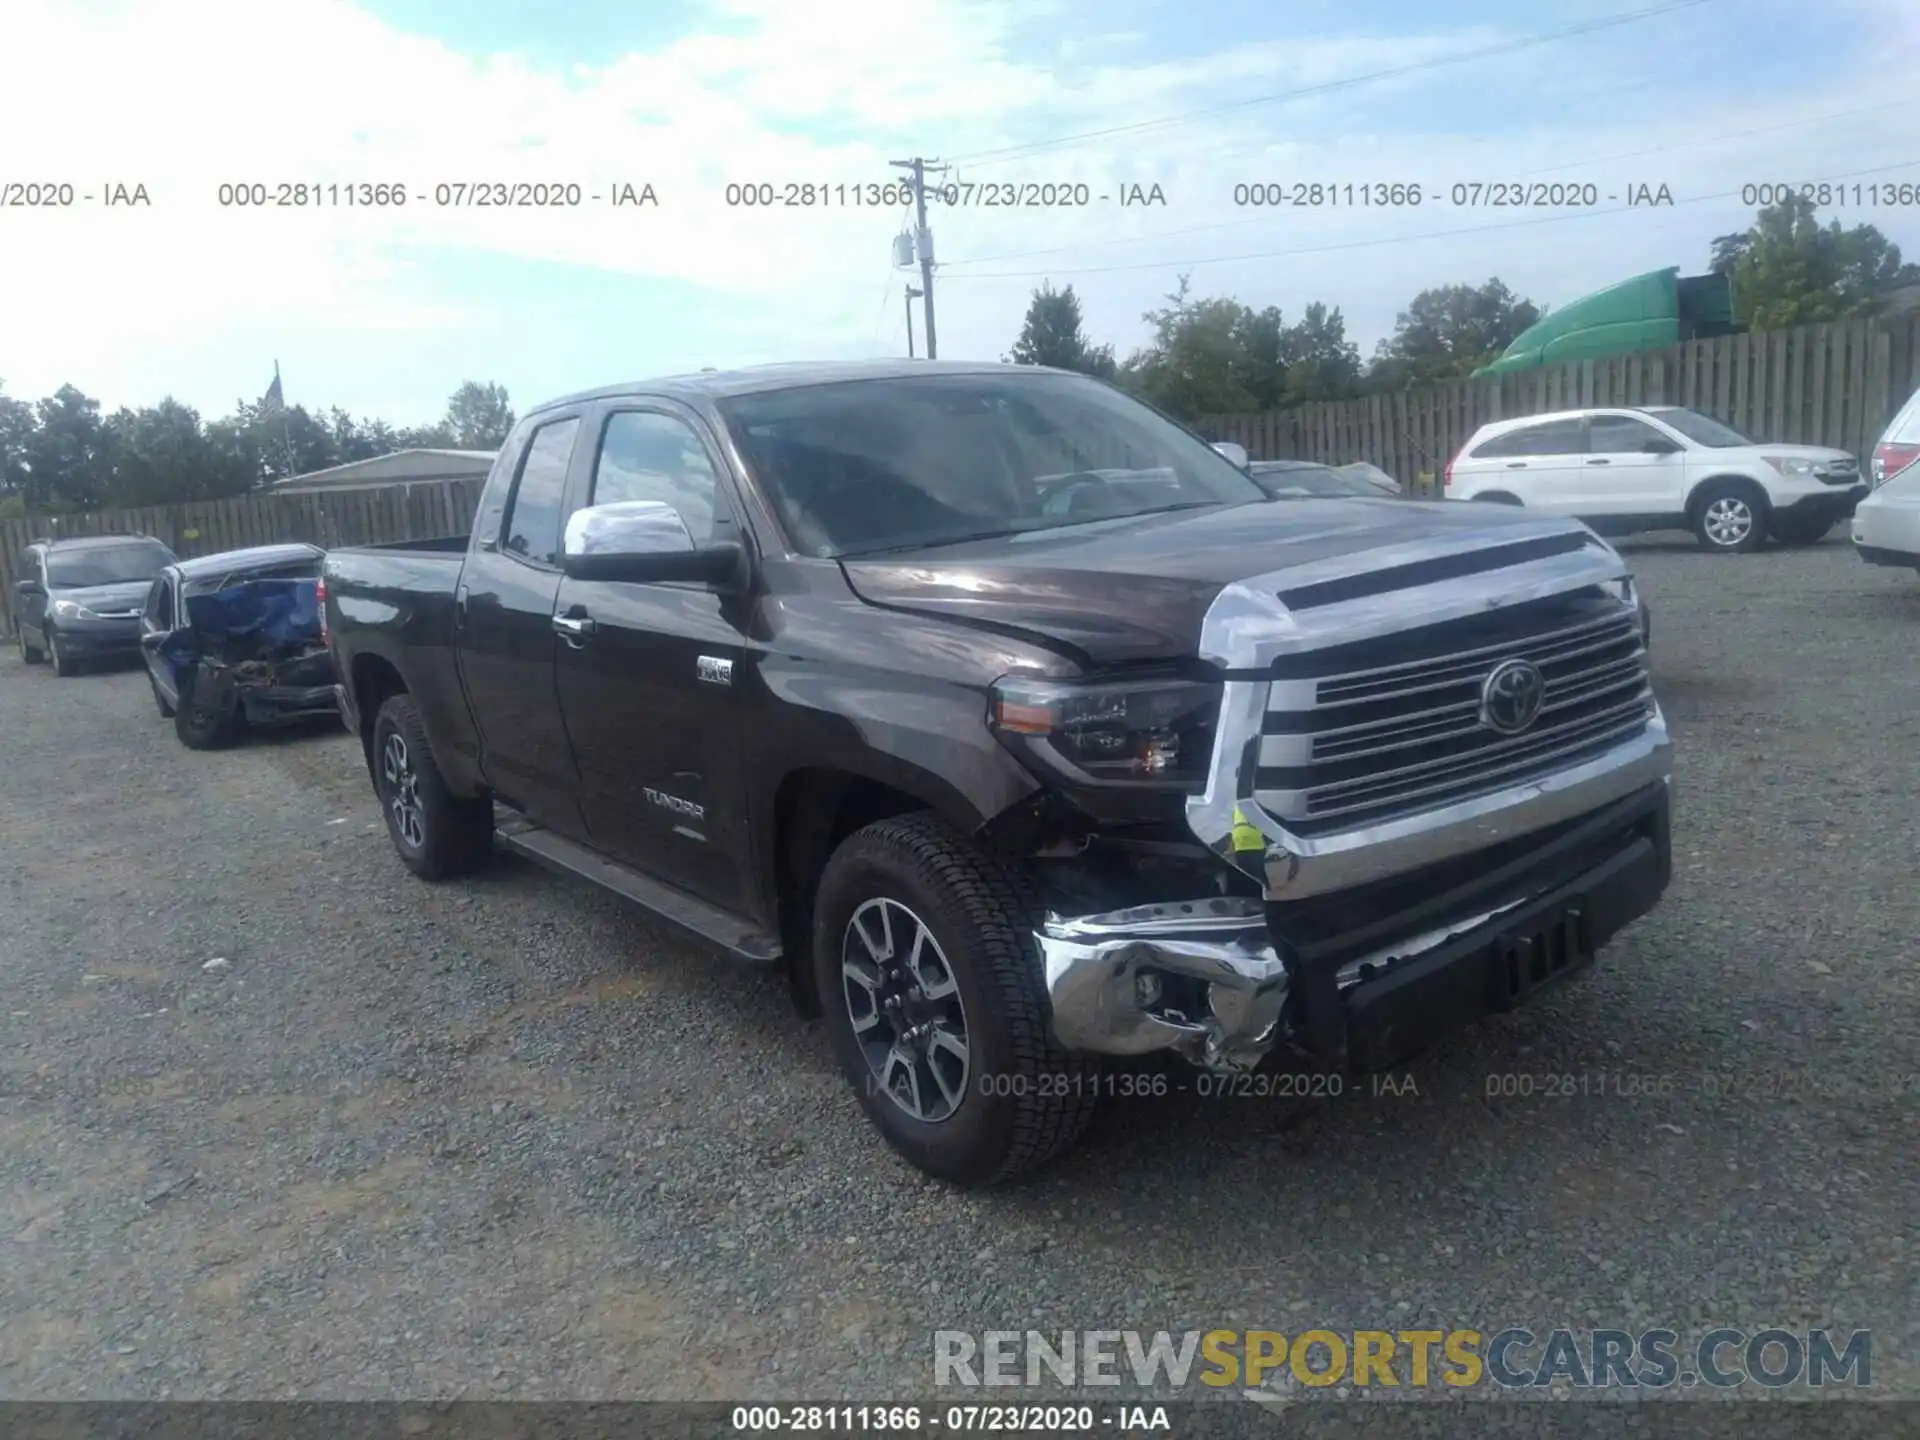 1 Photograph of a damaged car 5TFBY5F18LX892637 TOYOTA TUNDRA 4WD 2020